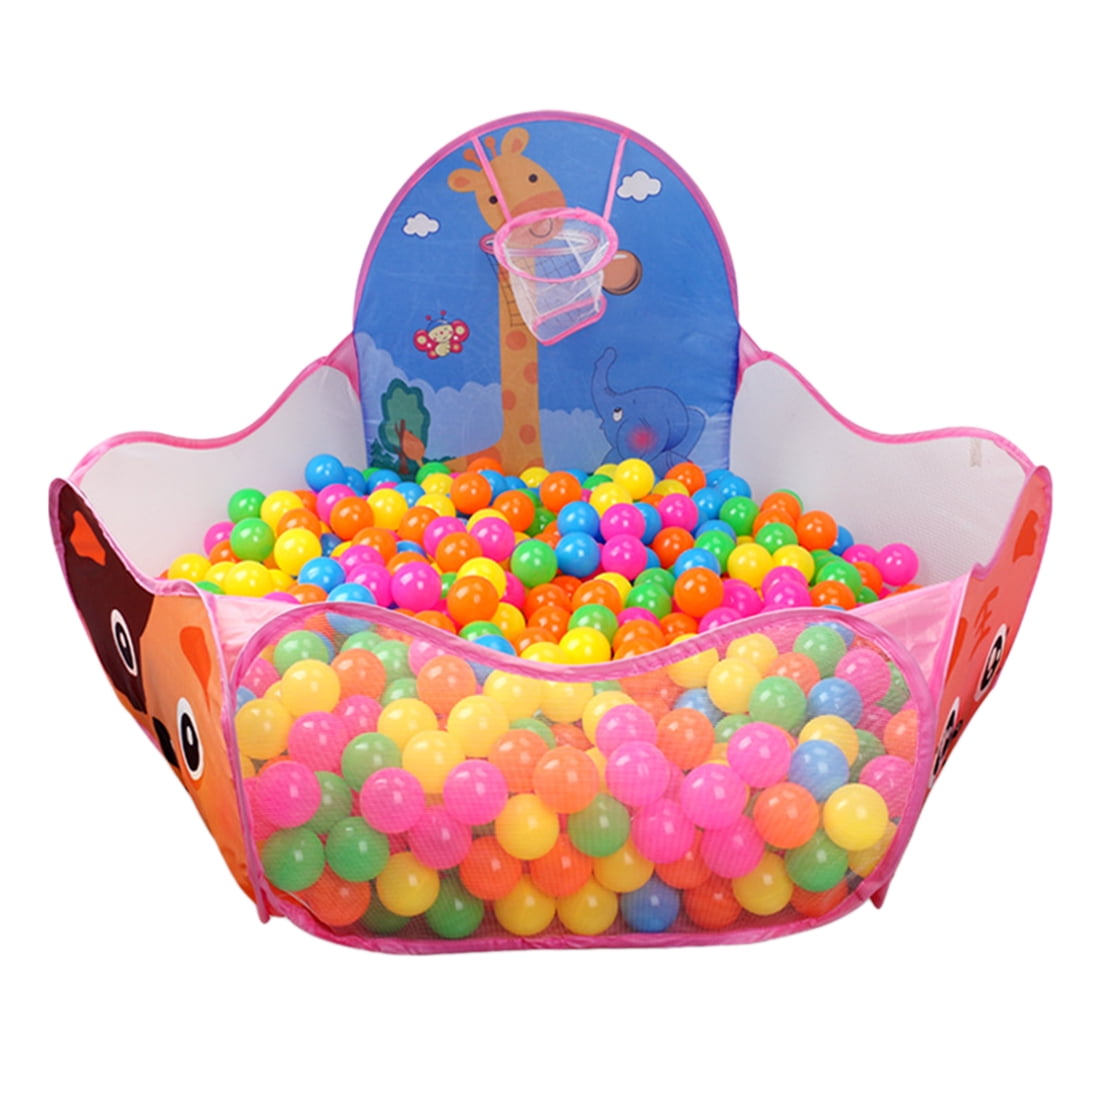 Heboland Ball Pit with Basketball Hoop Pop Up for Kids Toddlers Babies Folding Tent Crawl Playpen Ocean Pool Playhouse 4ft/120cm Balls Not Included